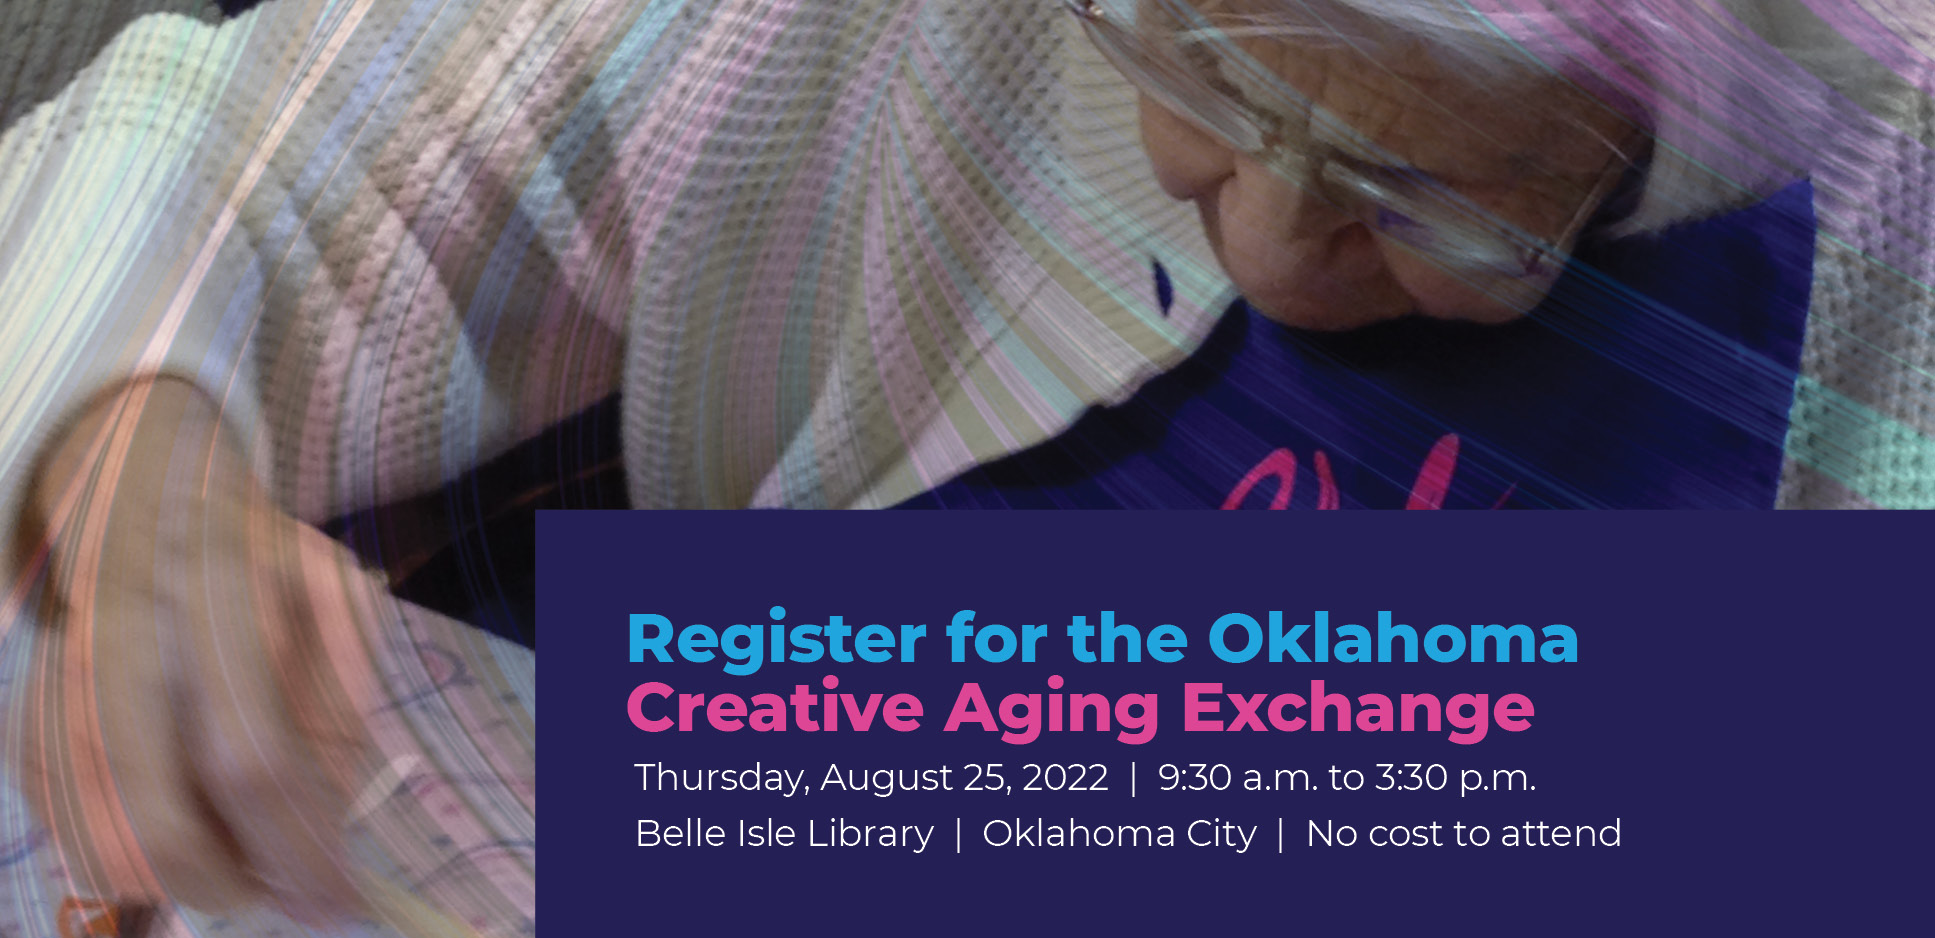 Register for the Oklahoma Creative Aging Exchange